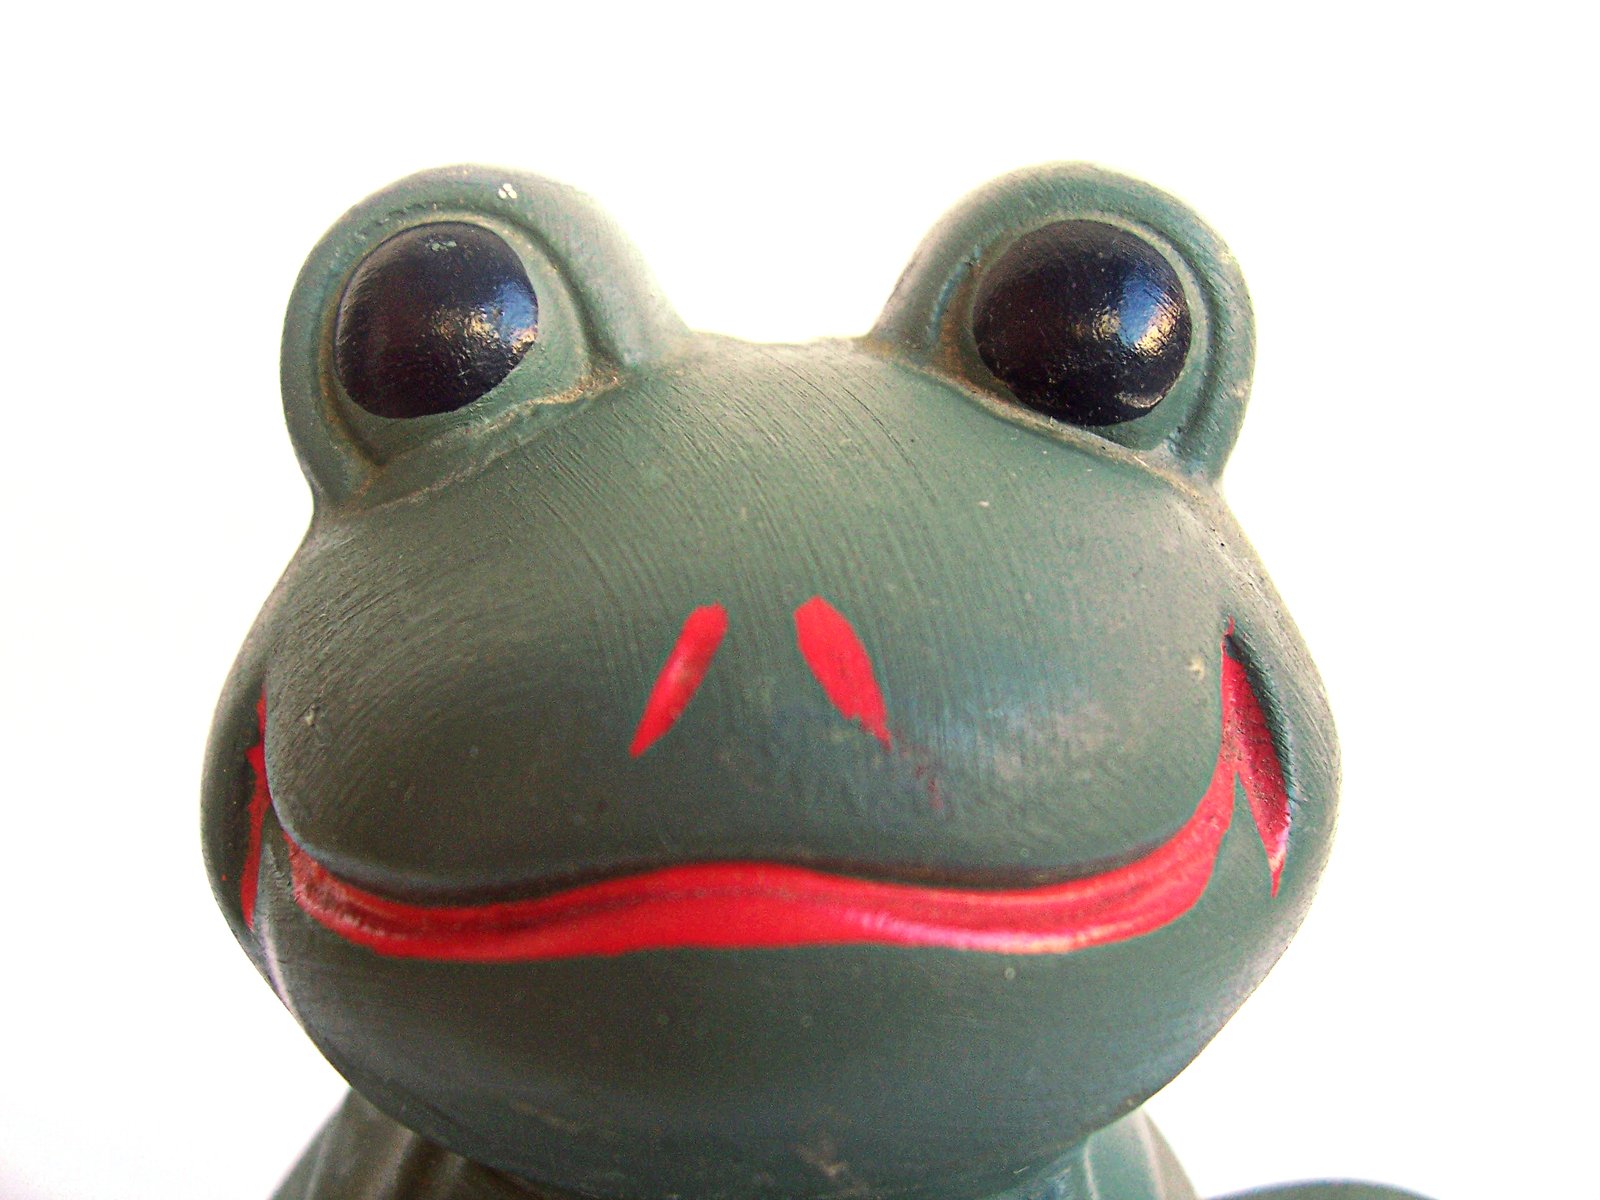 a red - eyeed frog toy is shown with a background